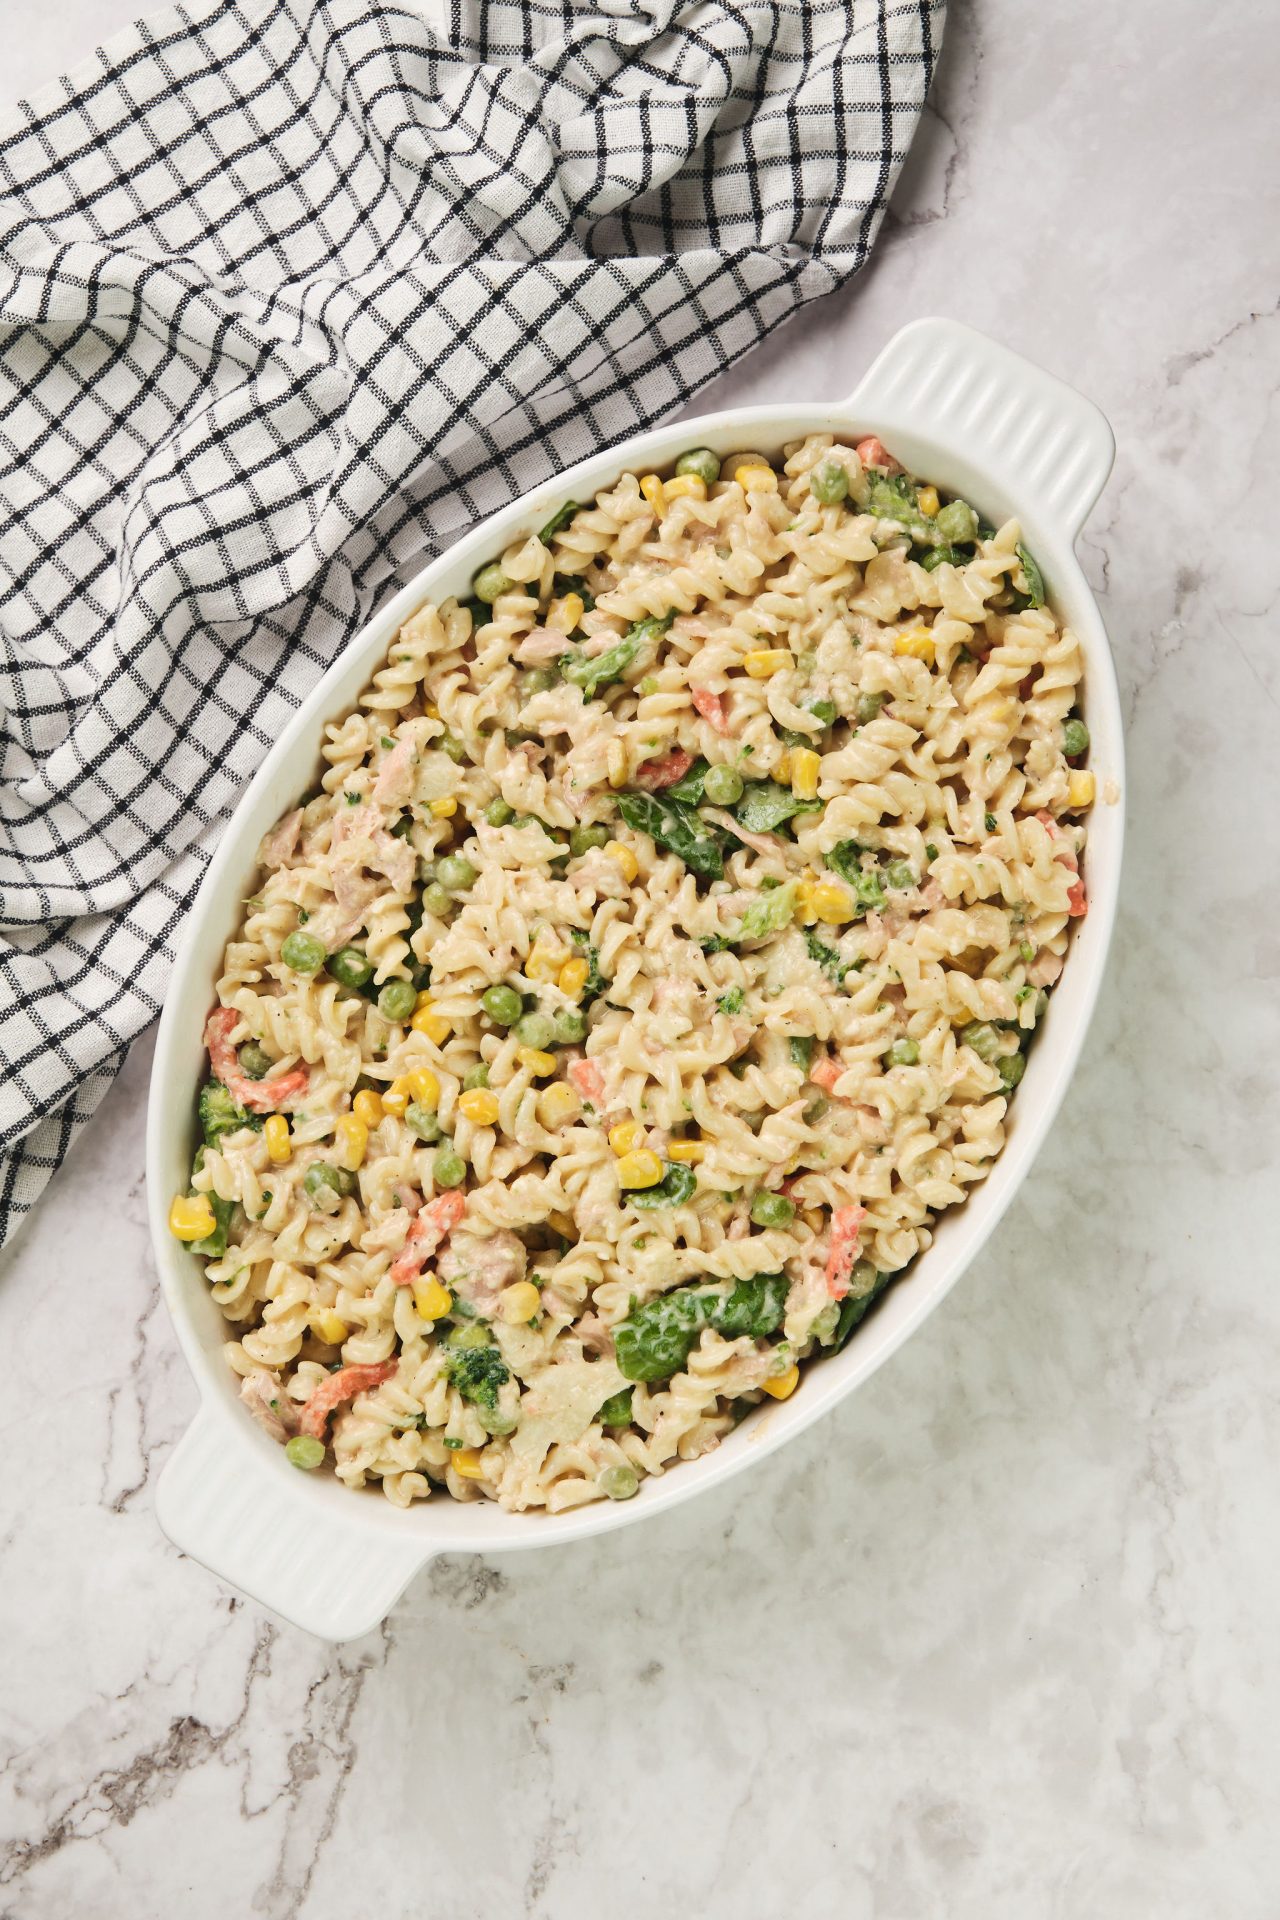 Tuna, vegetables, spiral pasta and white sauce arranged in a baking dish for creamy tuna pasta bake